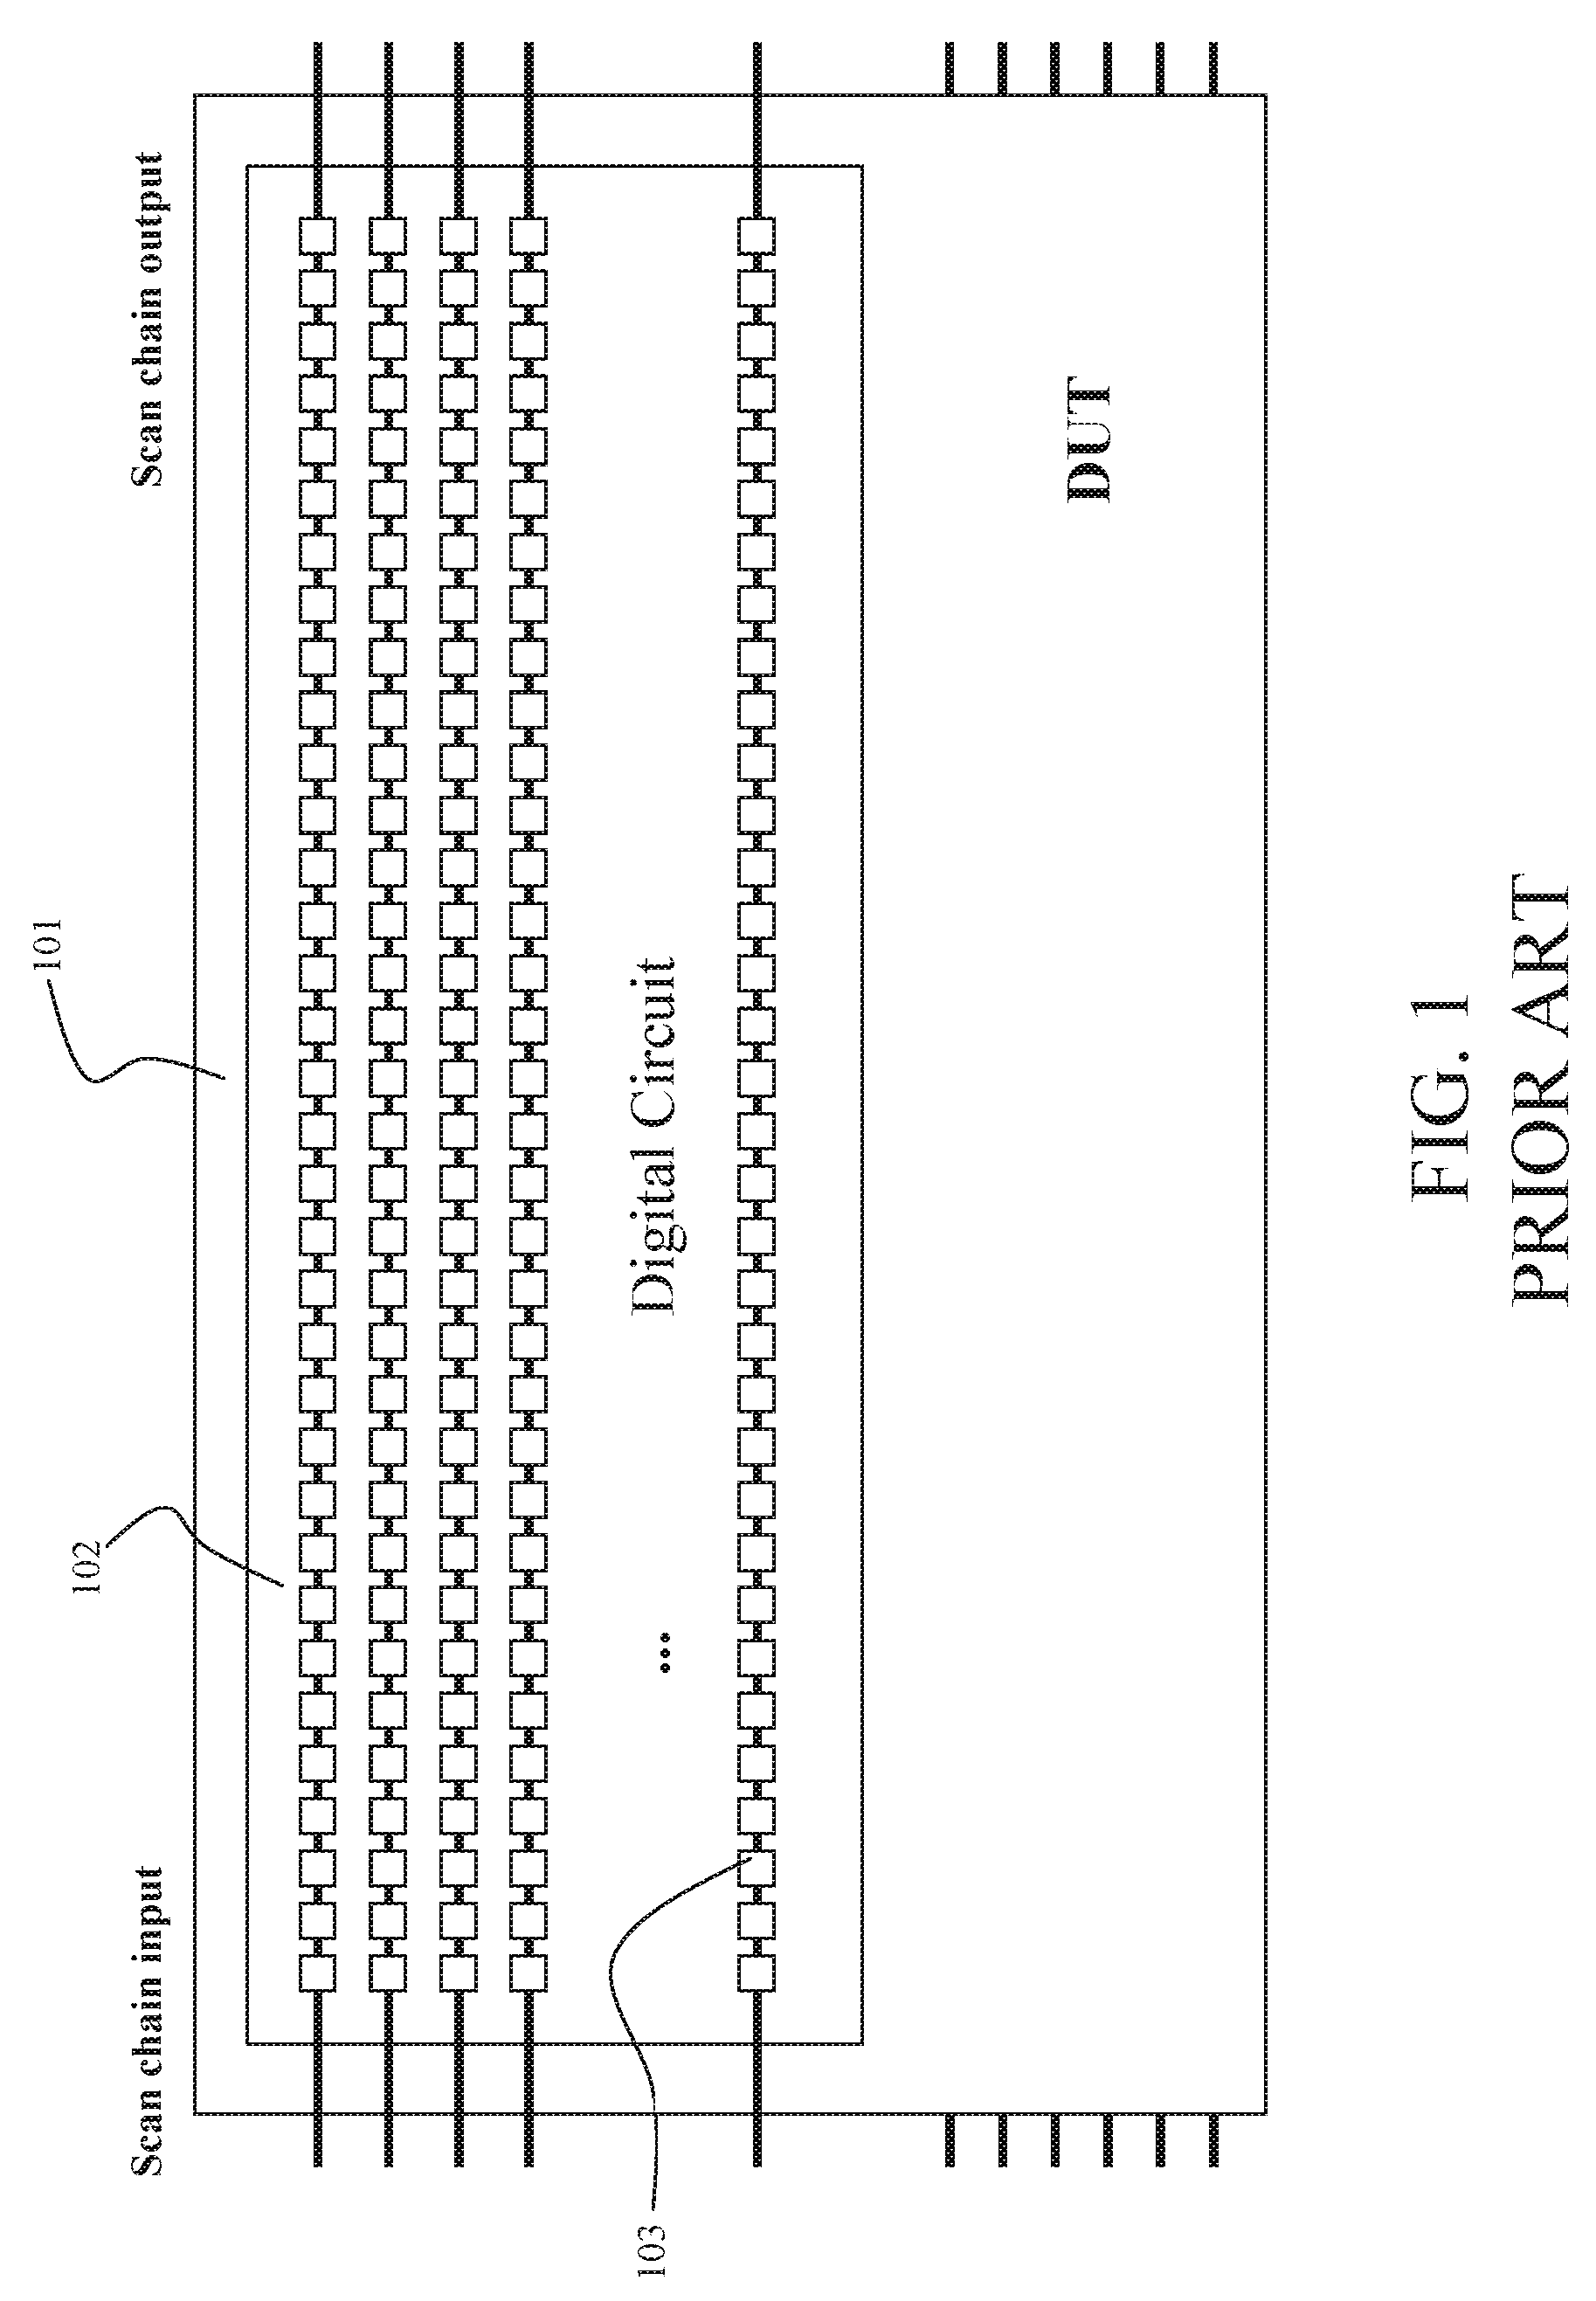 Process for making an electric testing of electronic devices